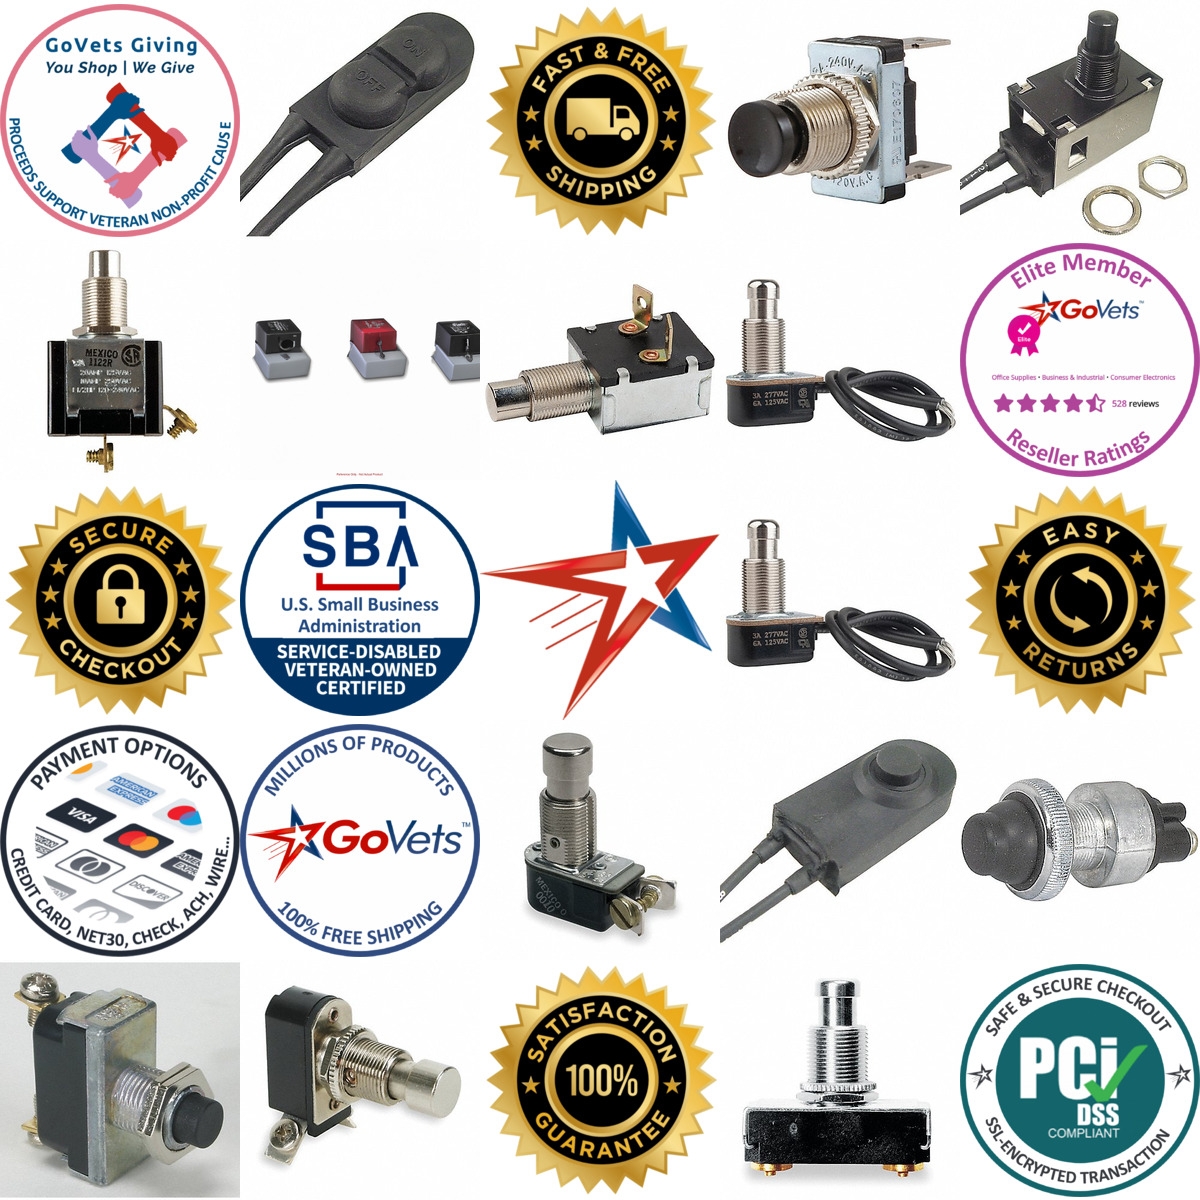 A selection of Miniature Pushbutton Switches products on GoVets